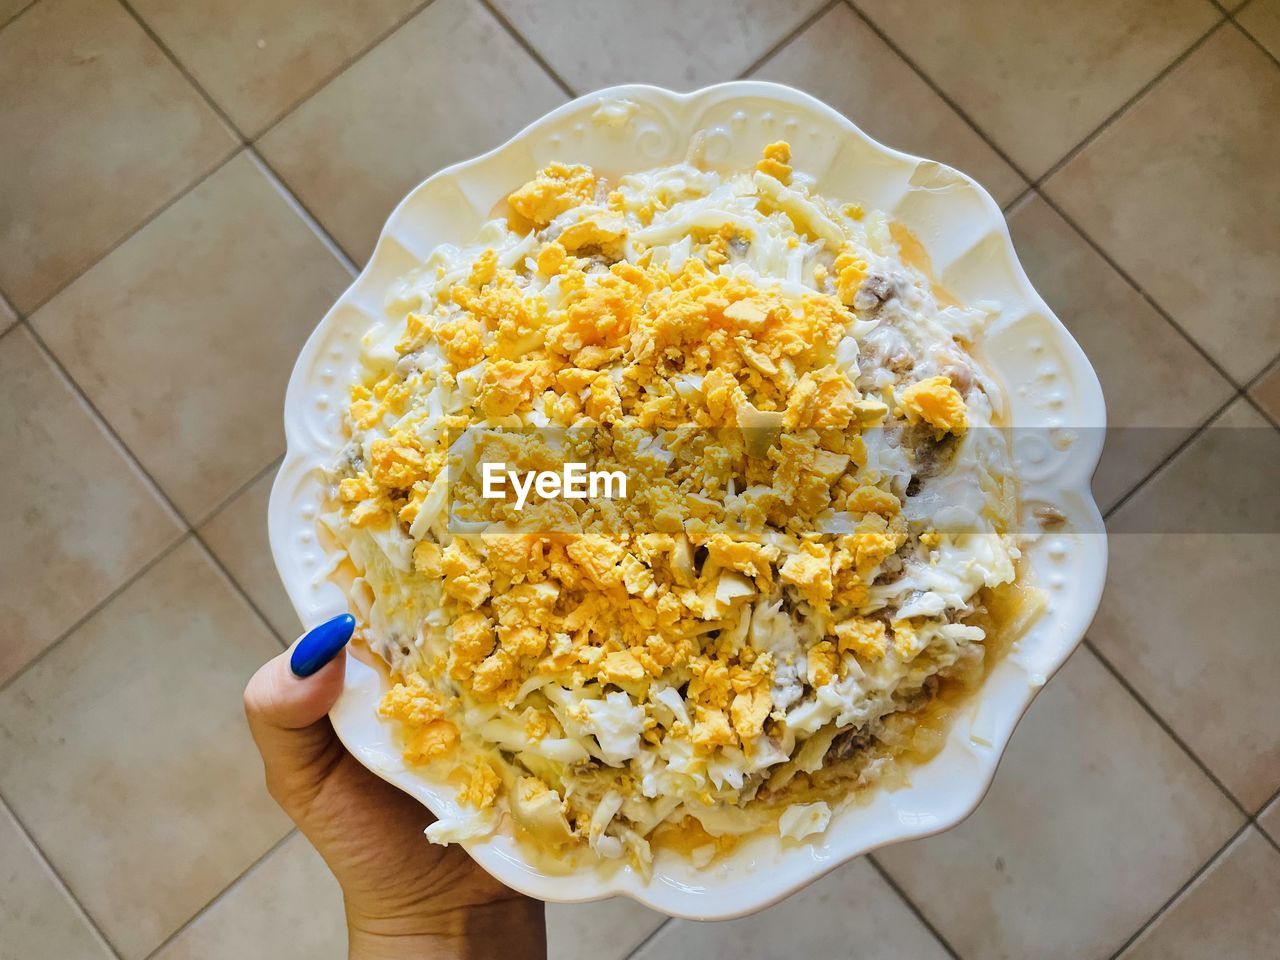 food, food and drink, hand, high angle view, yellow, dish, snack, one person, tiled floor, kettle corn, tile, flooring, holding, freshness, personal perspective, lifestyles, healthy eating, cuisine, indoors, directly above, produce, wellbeing, italian food, dairy, bowl, popcorn